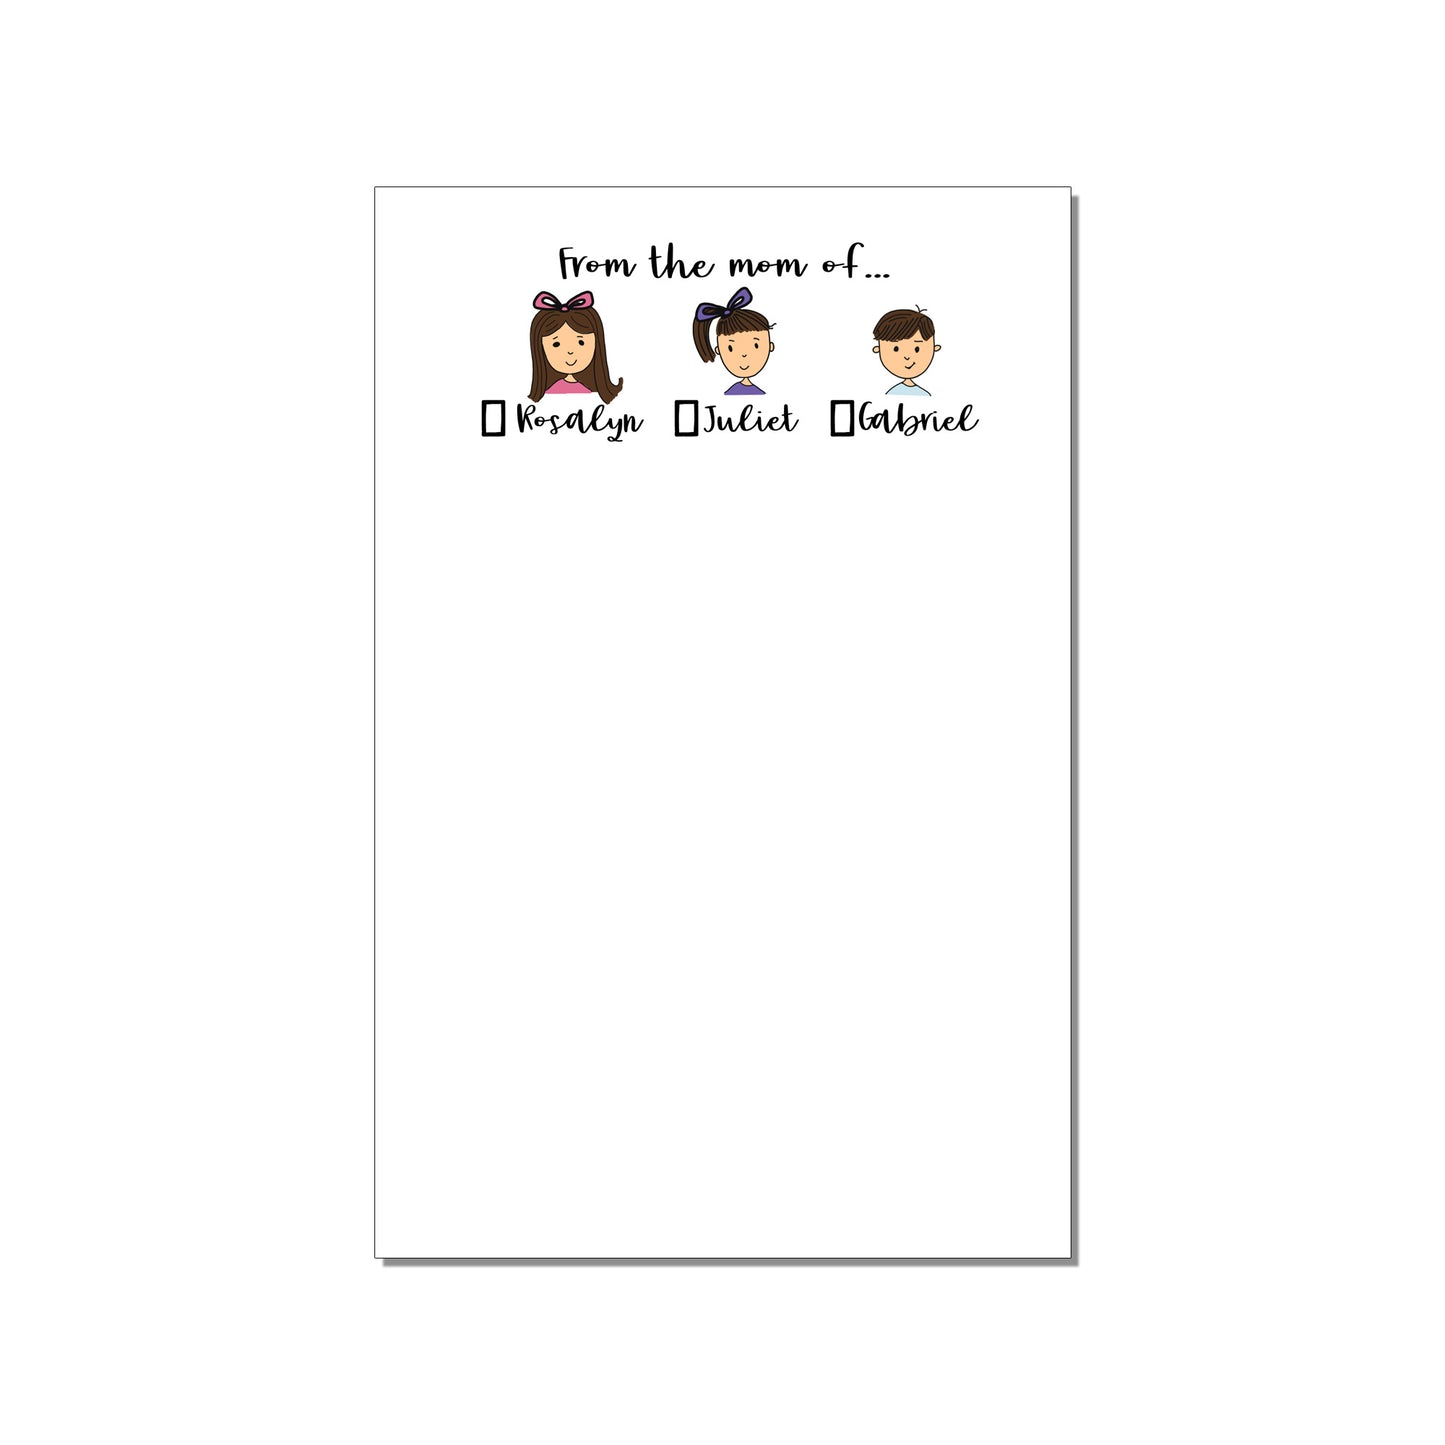 FROM THE MOM OF... THREE CHILD PERSONALIZED LARGE NOTEPAD